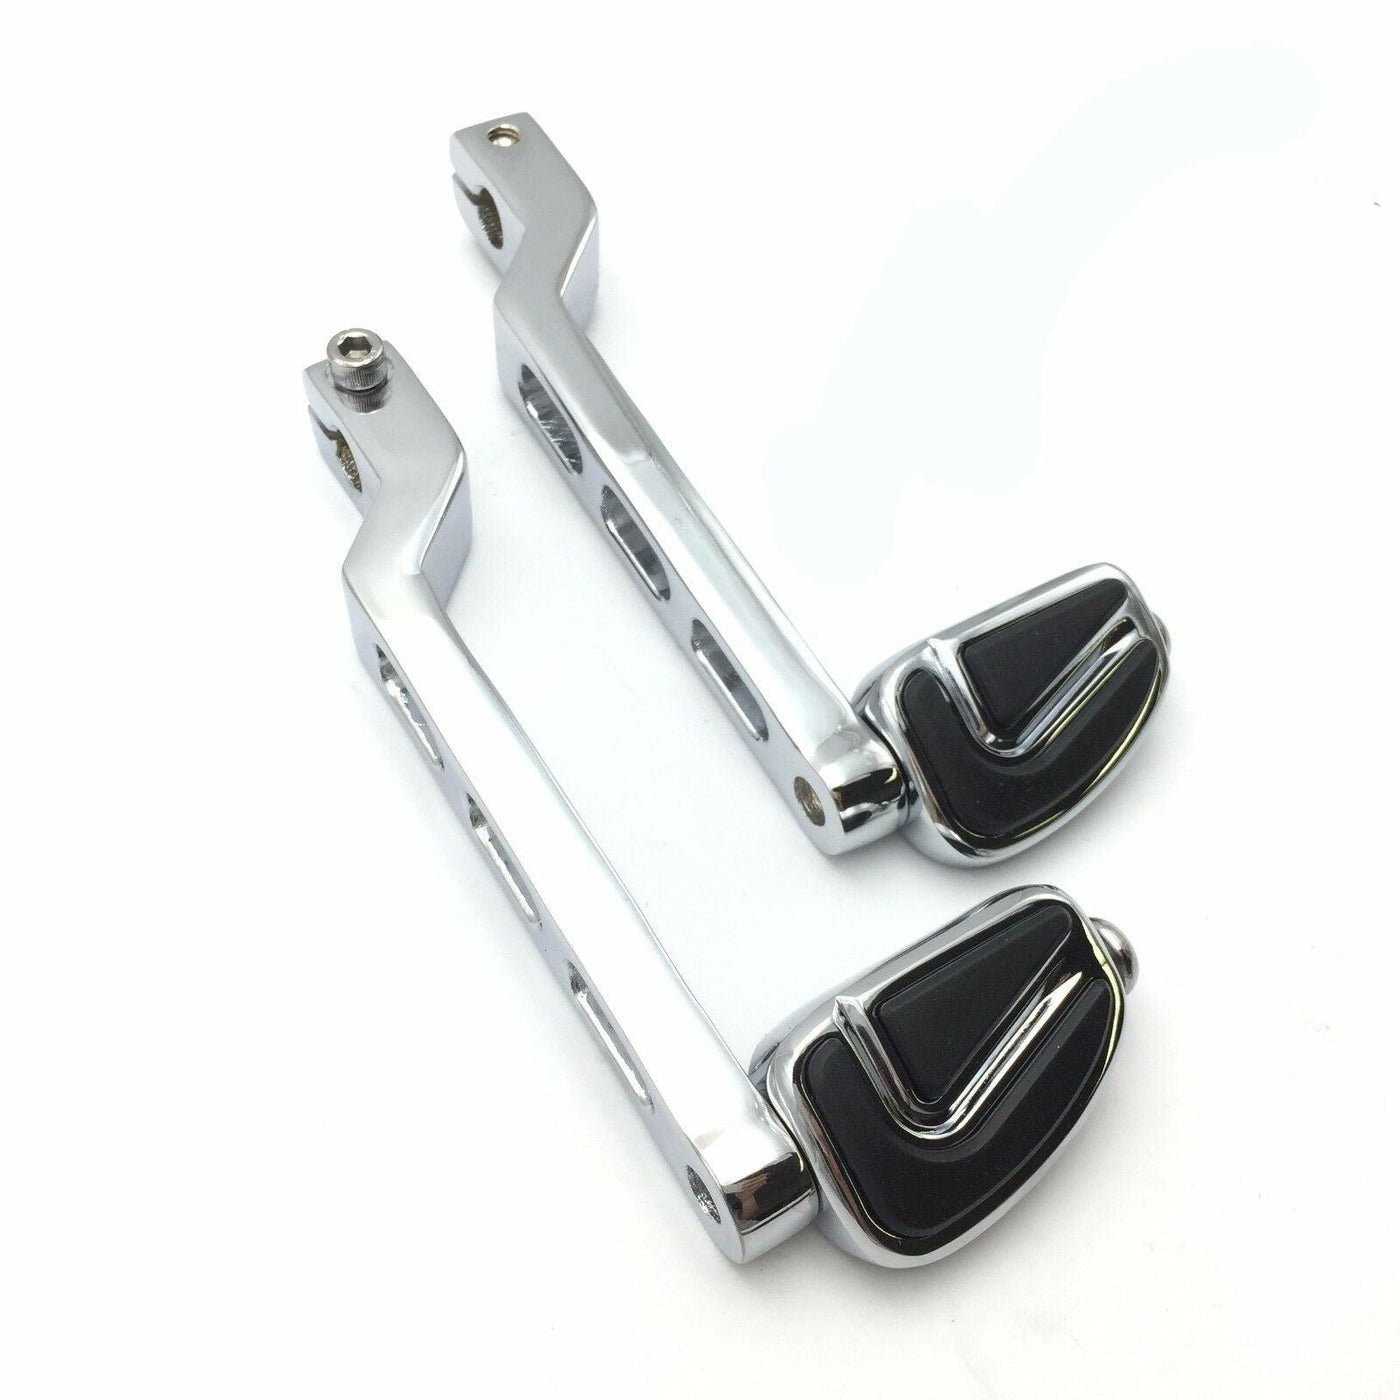 Cr AirFlow Shifter Peg For Harley FLS Fat Boy Road King FLHR CVO Street Glide - Moto Life Products